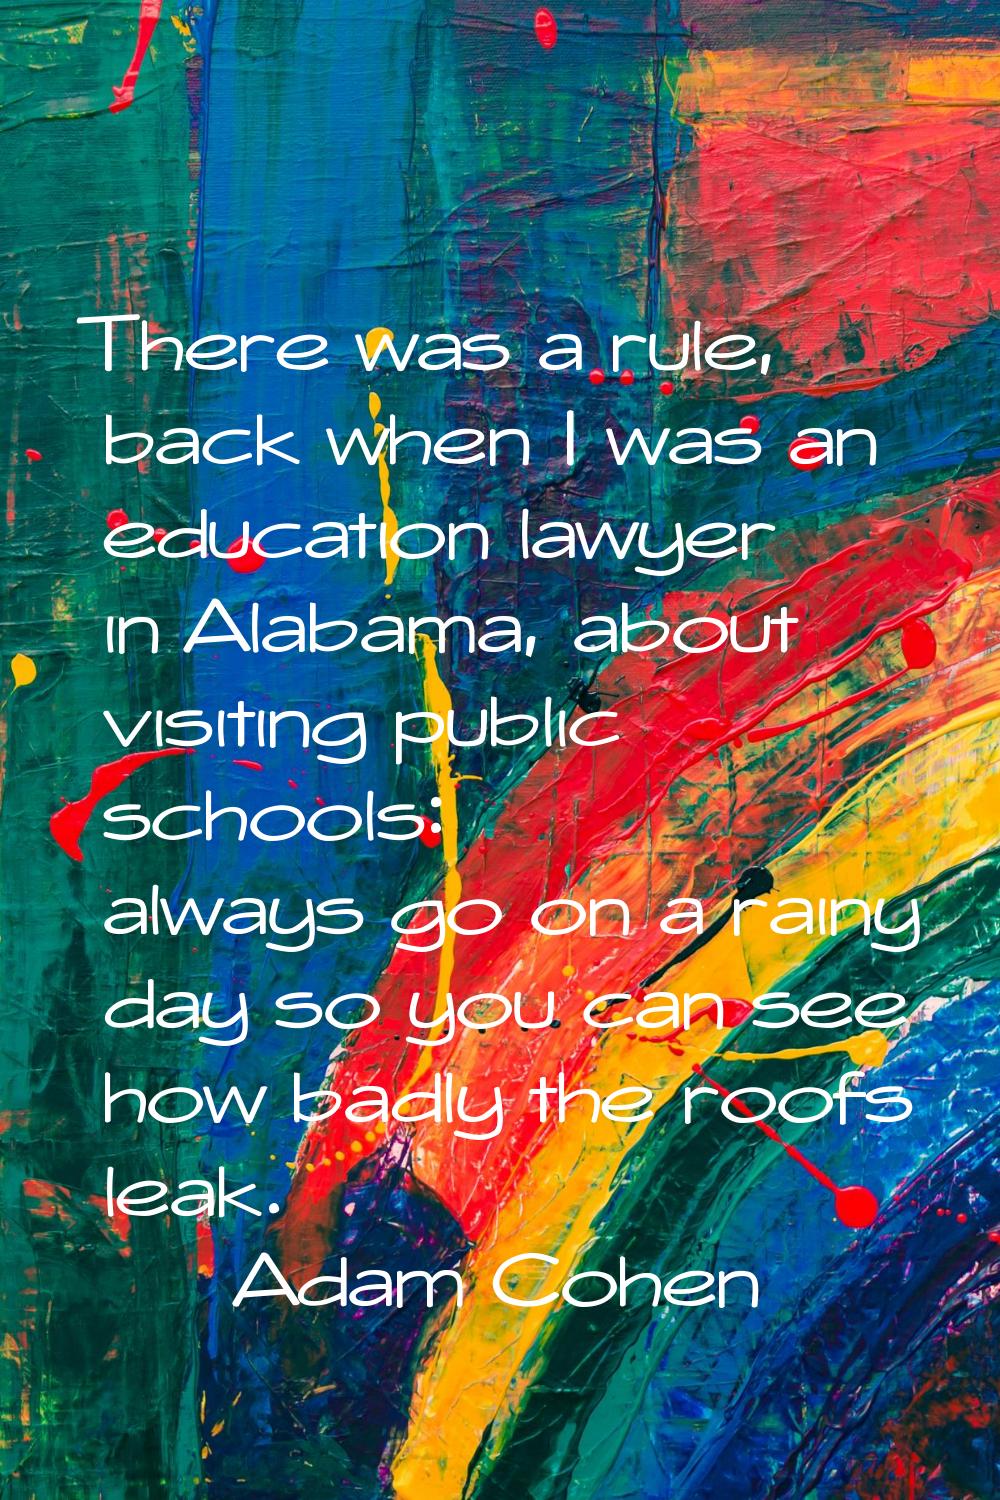 There was a rule, back when I was an education lawyer in Alabama, about visiting public schools: al